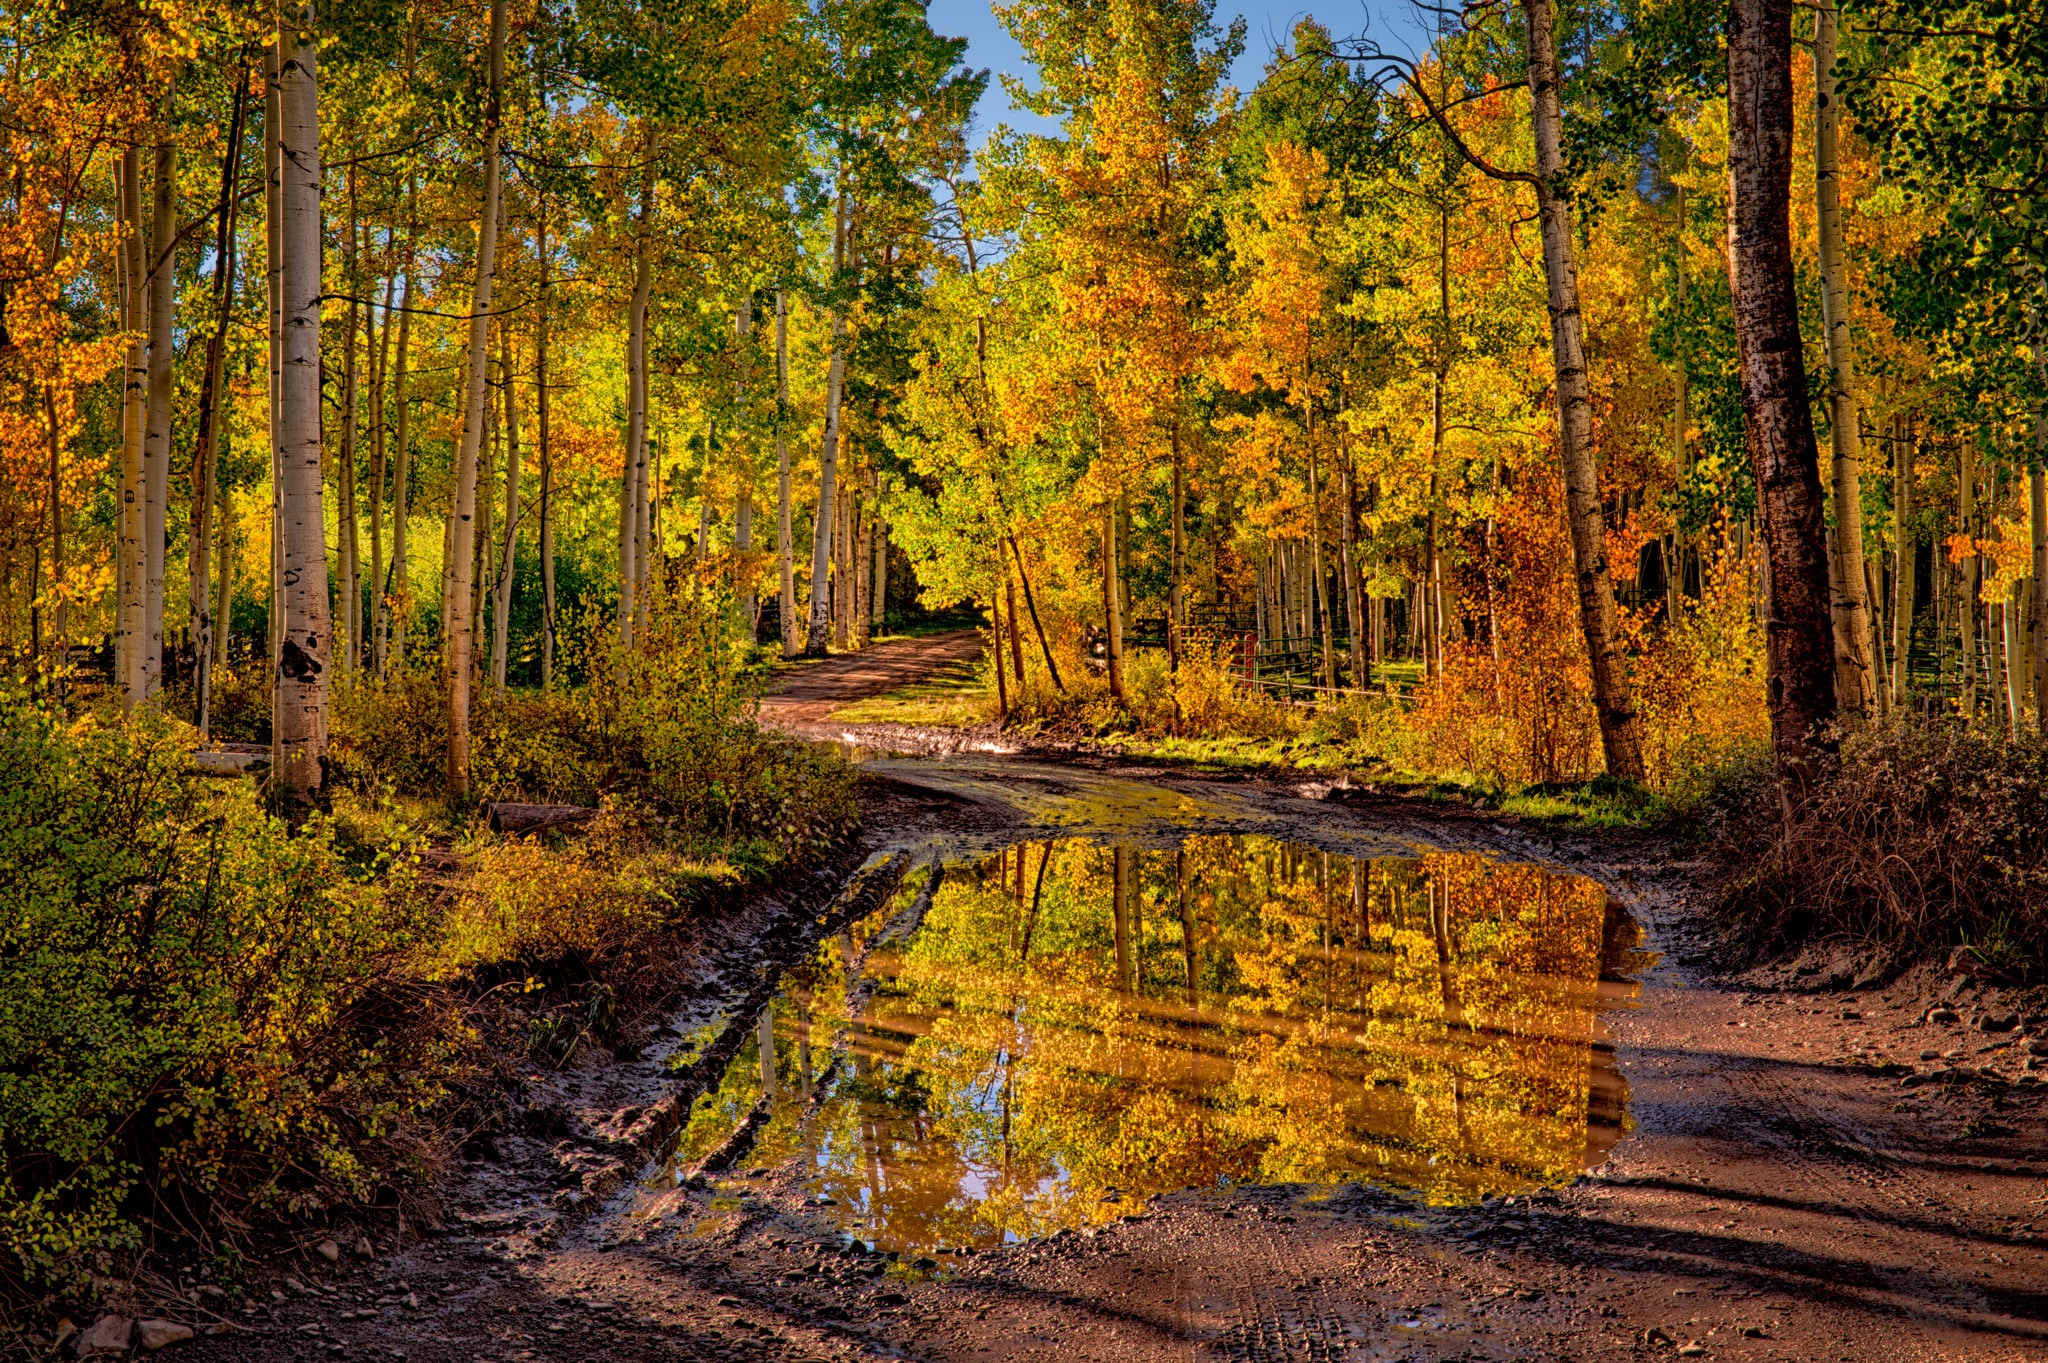 Autumn aspens are reflected in a large puddle on CR 5 near Ridgway, Colorado.